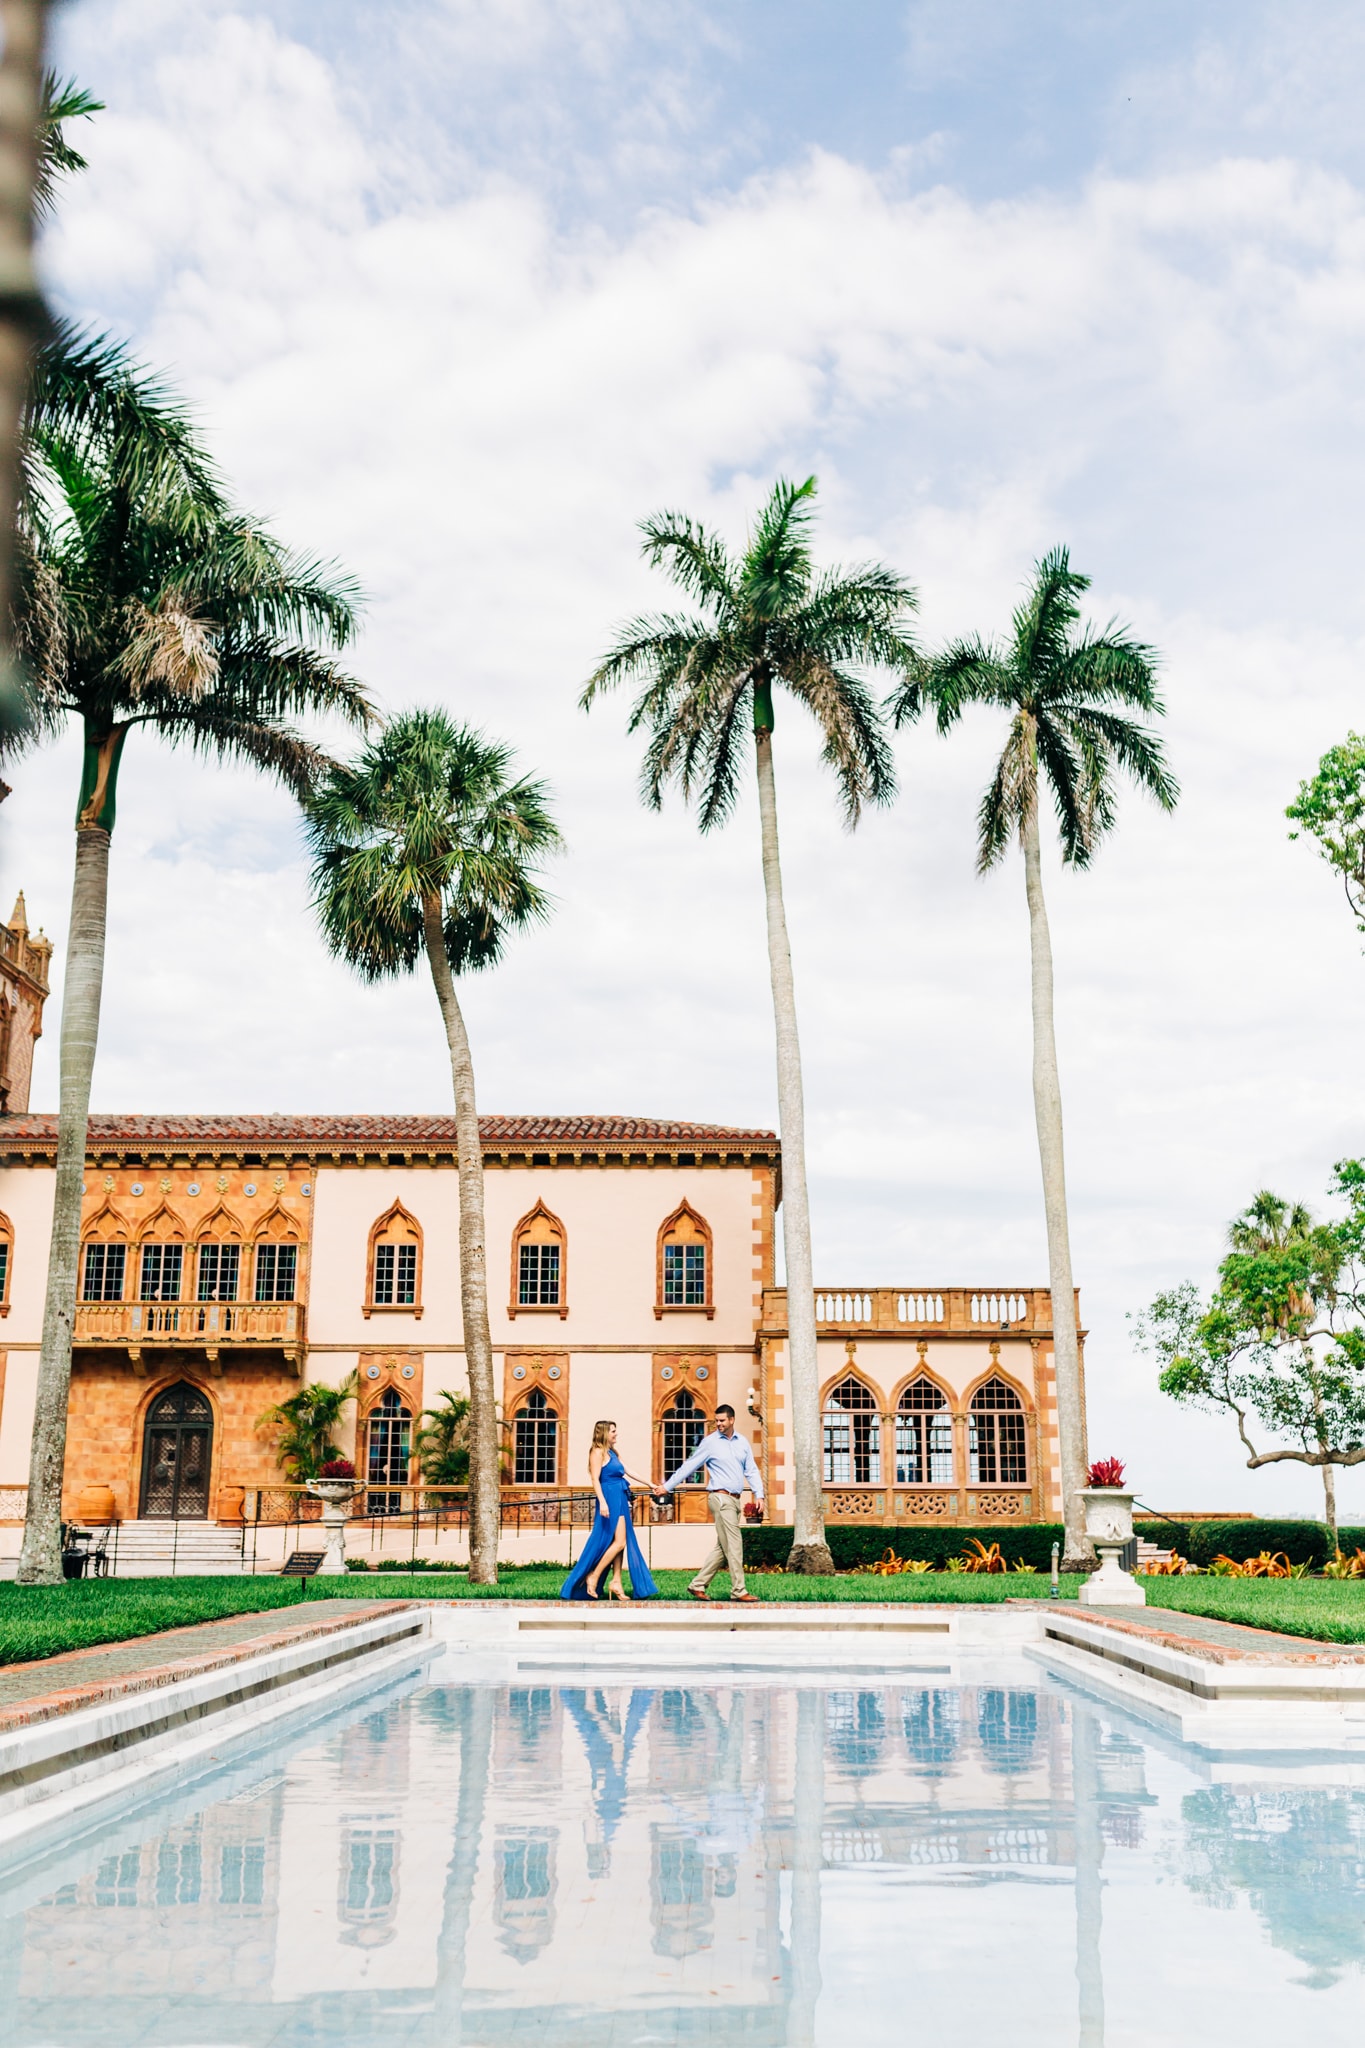 man leading woman along the infinity pool at ringling museum with palm trees and pink building in background